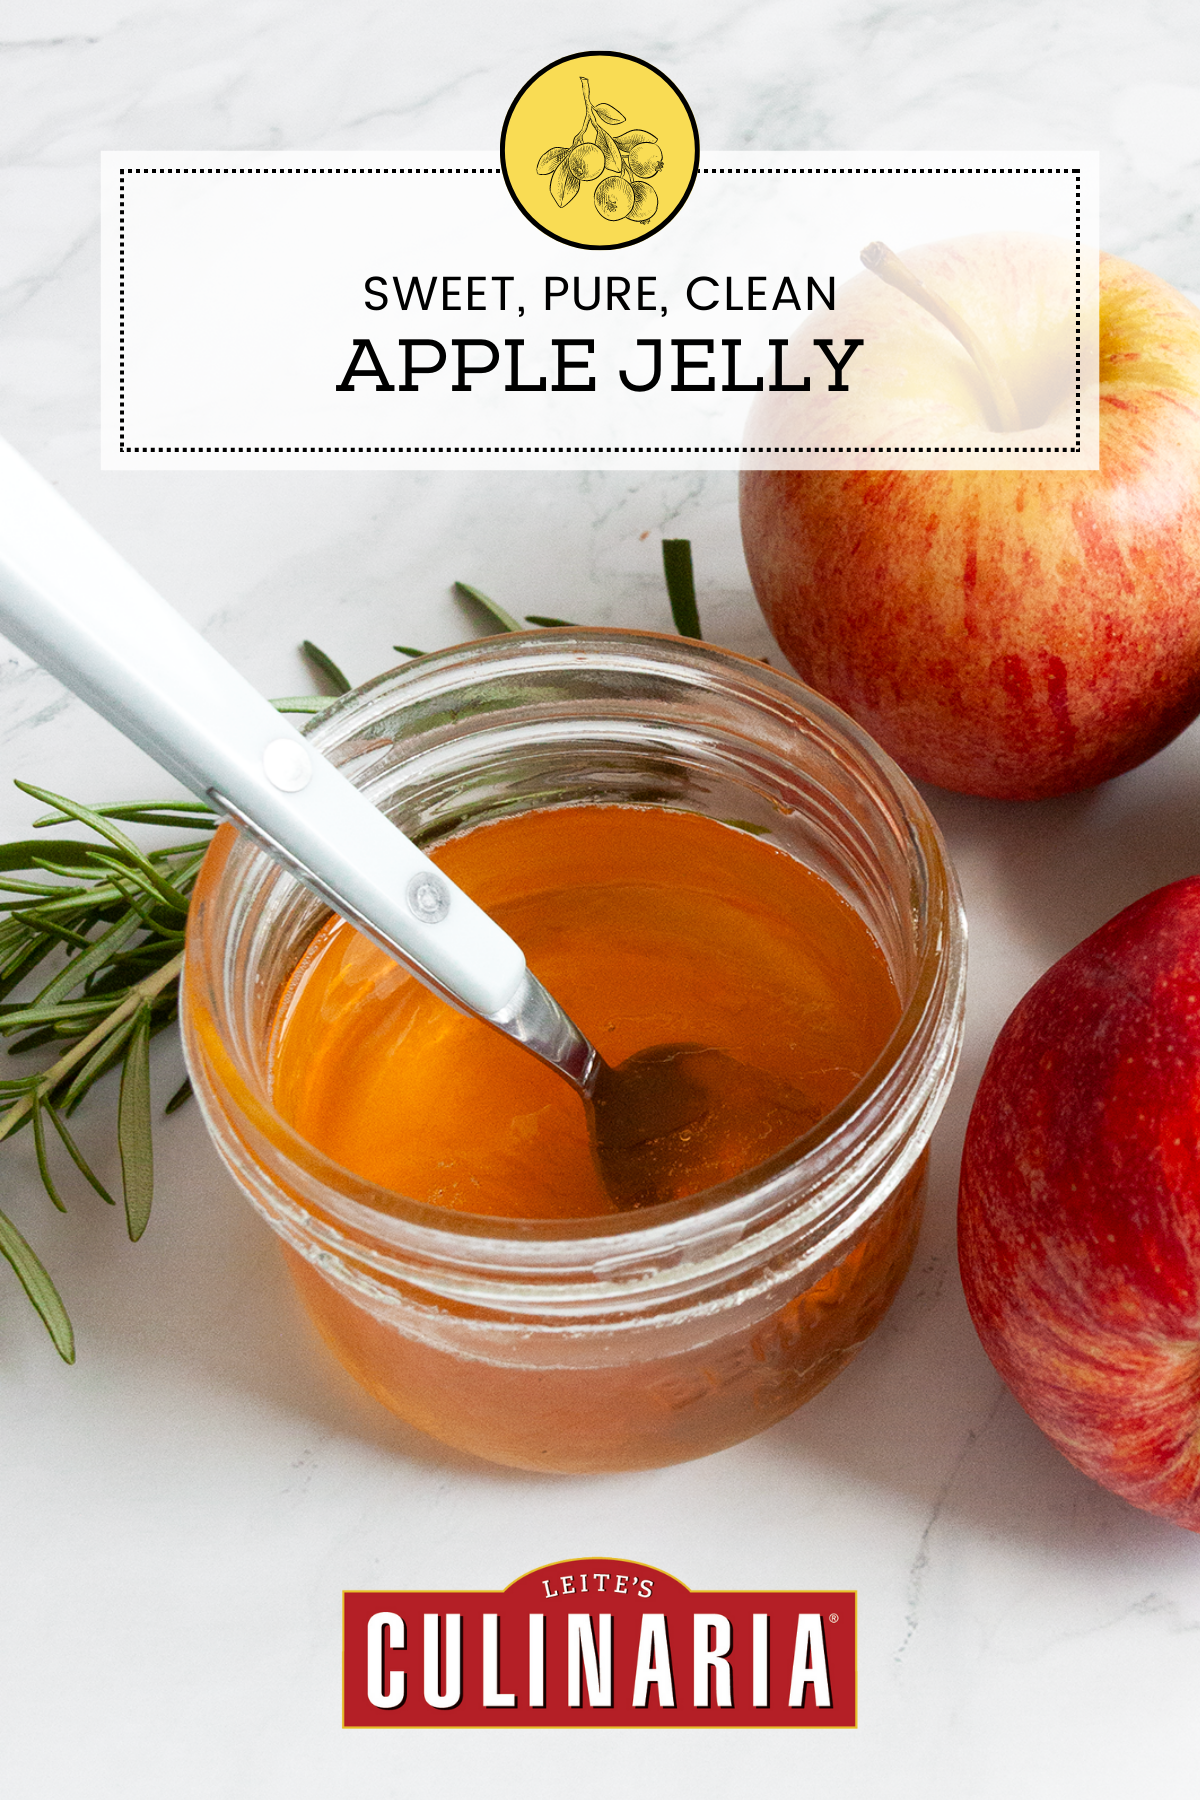 A jar of apple jelly with a spoon resting inside and a three apples on the side.